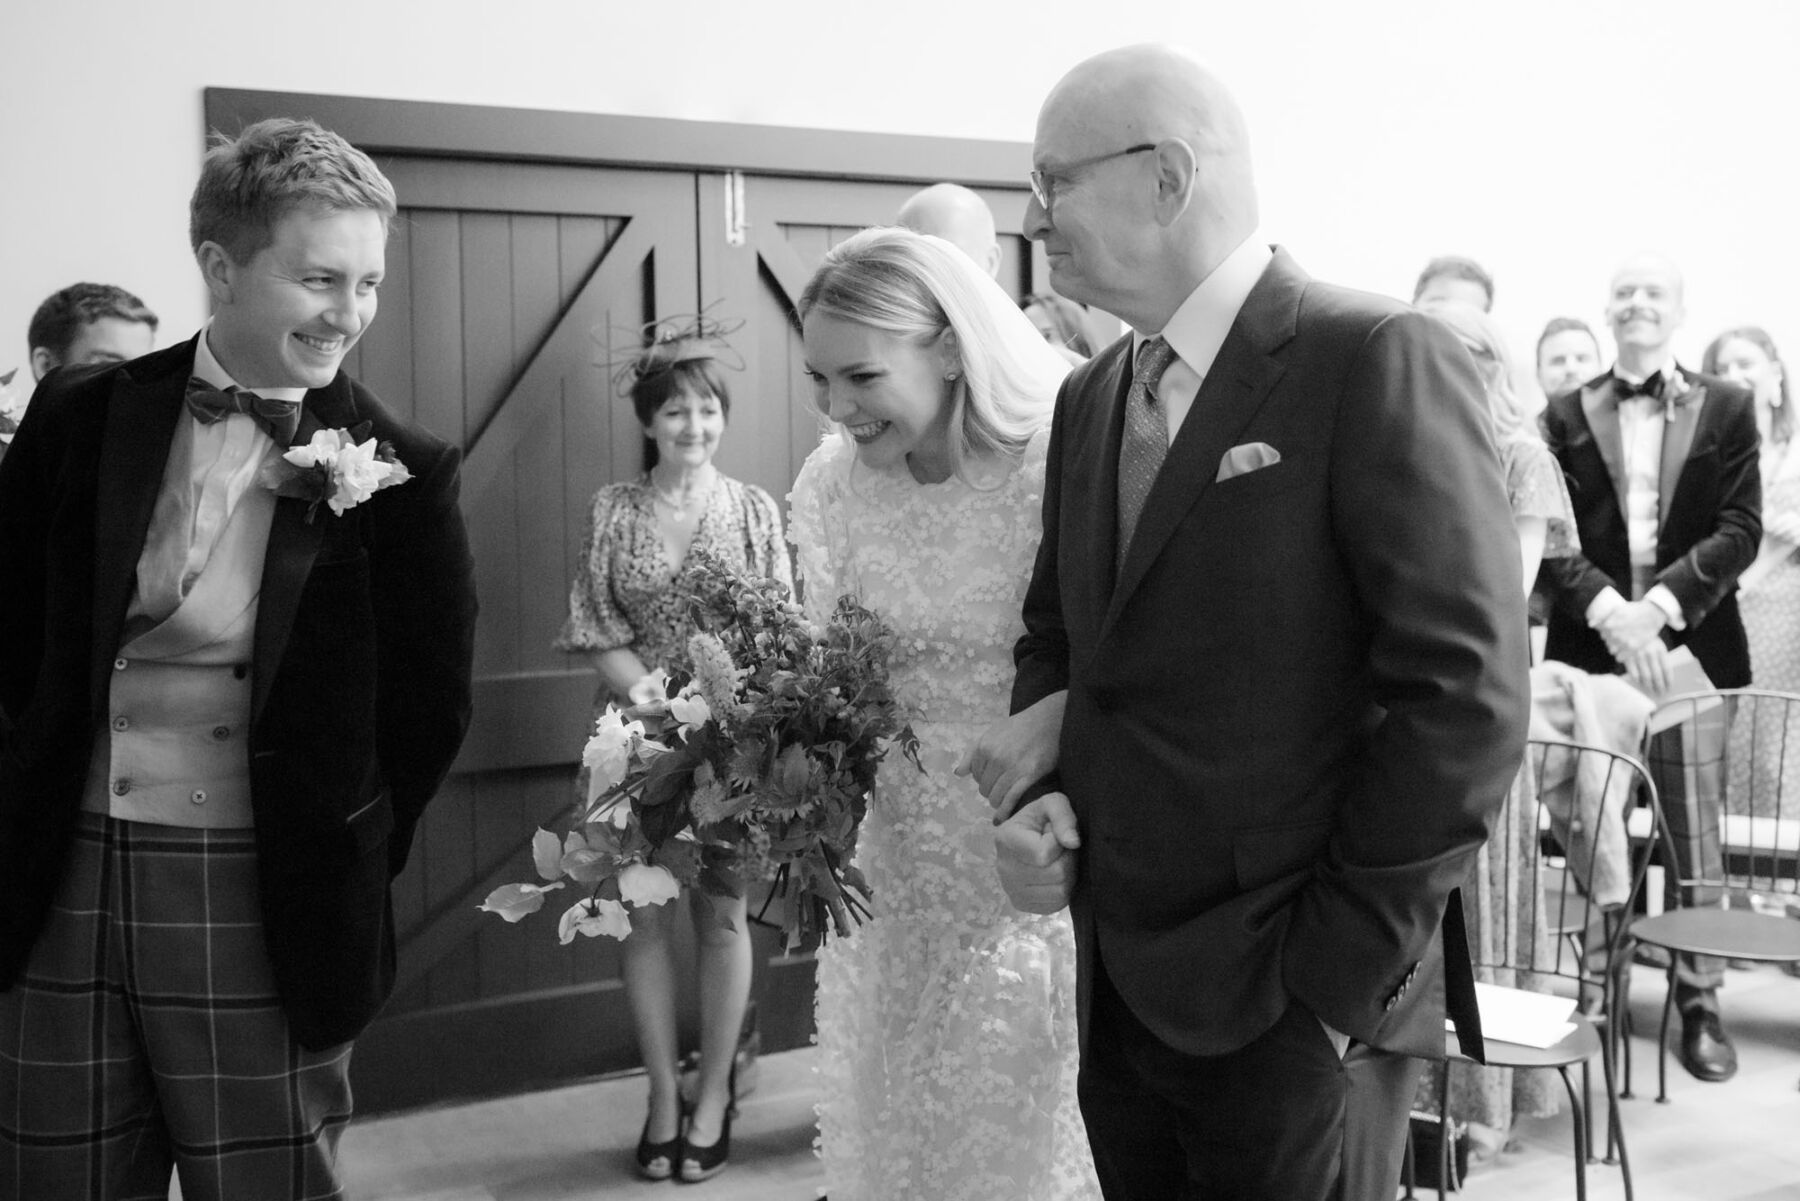 Cecilie Bahnsen bride arriving at ceremony with her father. Caro Weiss Photography.